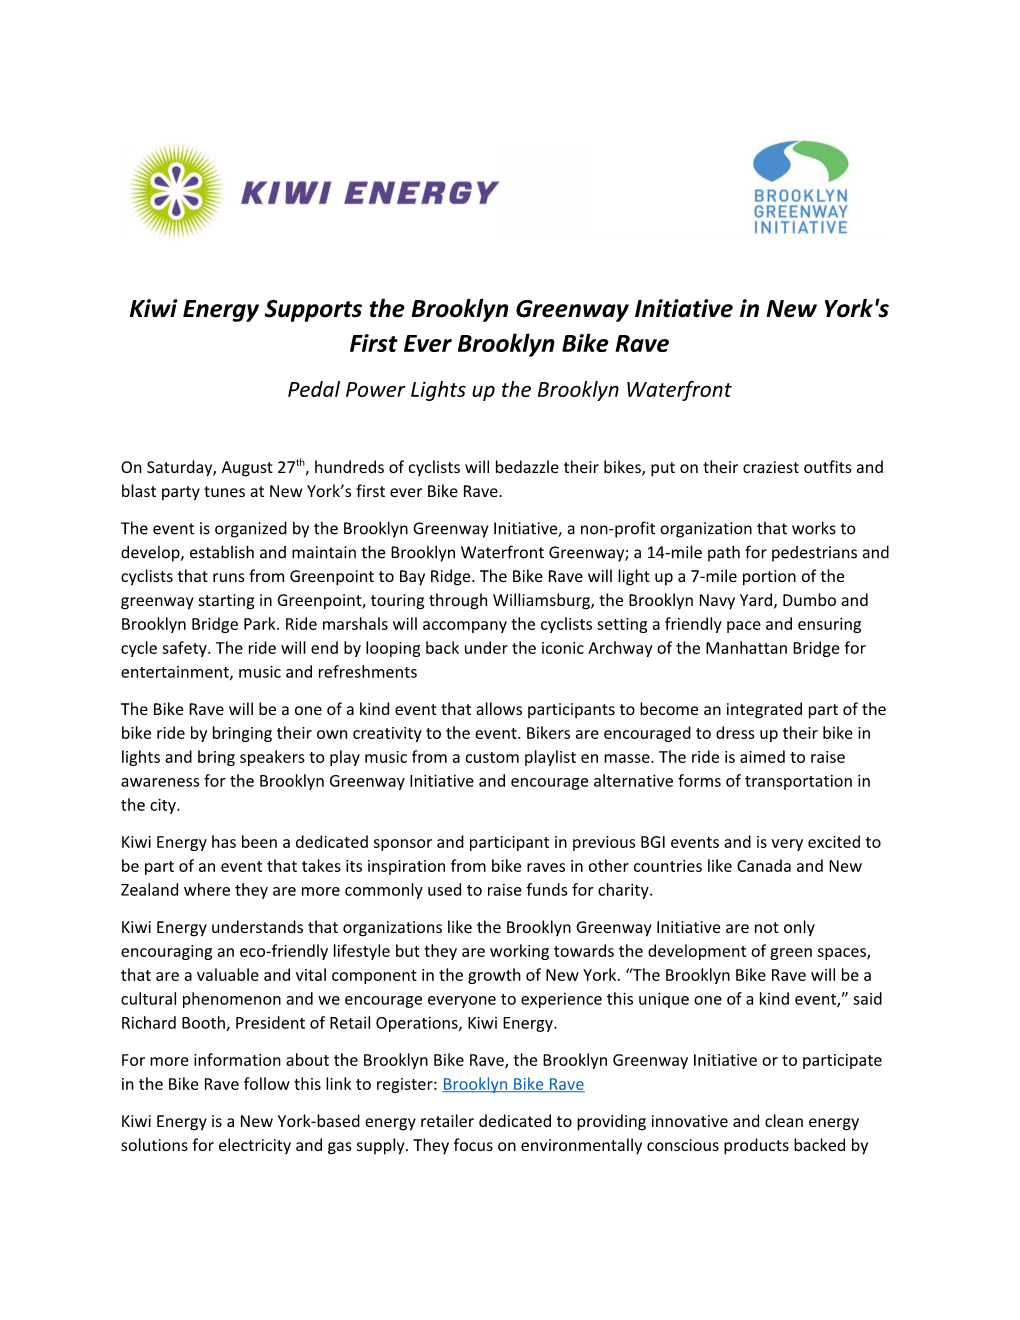 Kiwi Energy Supports the Brooklyn Greenway Initiative in New York's First Ever Brooklyn